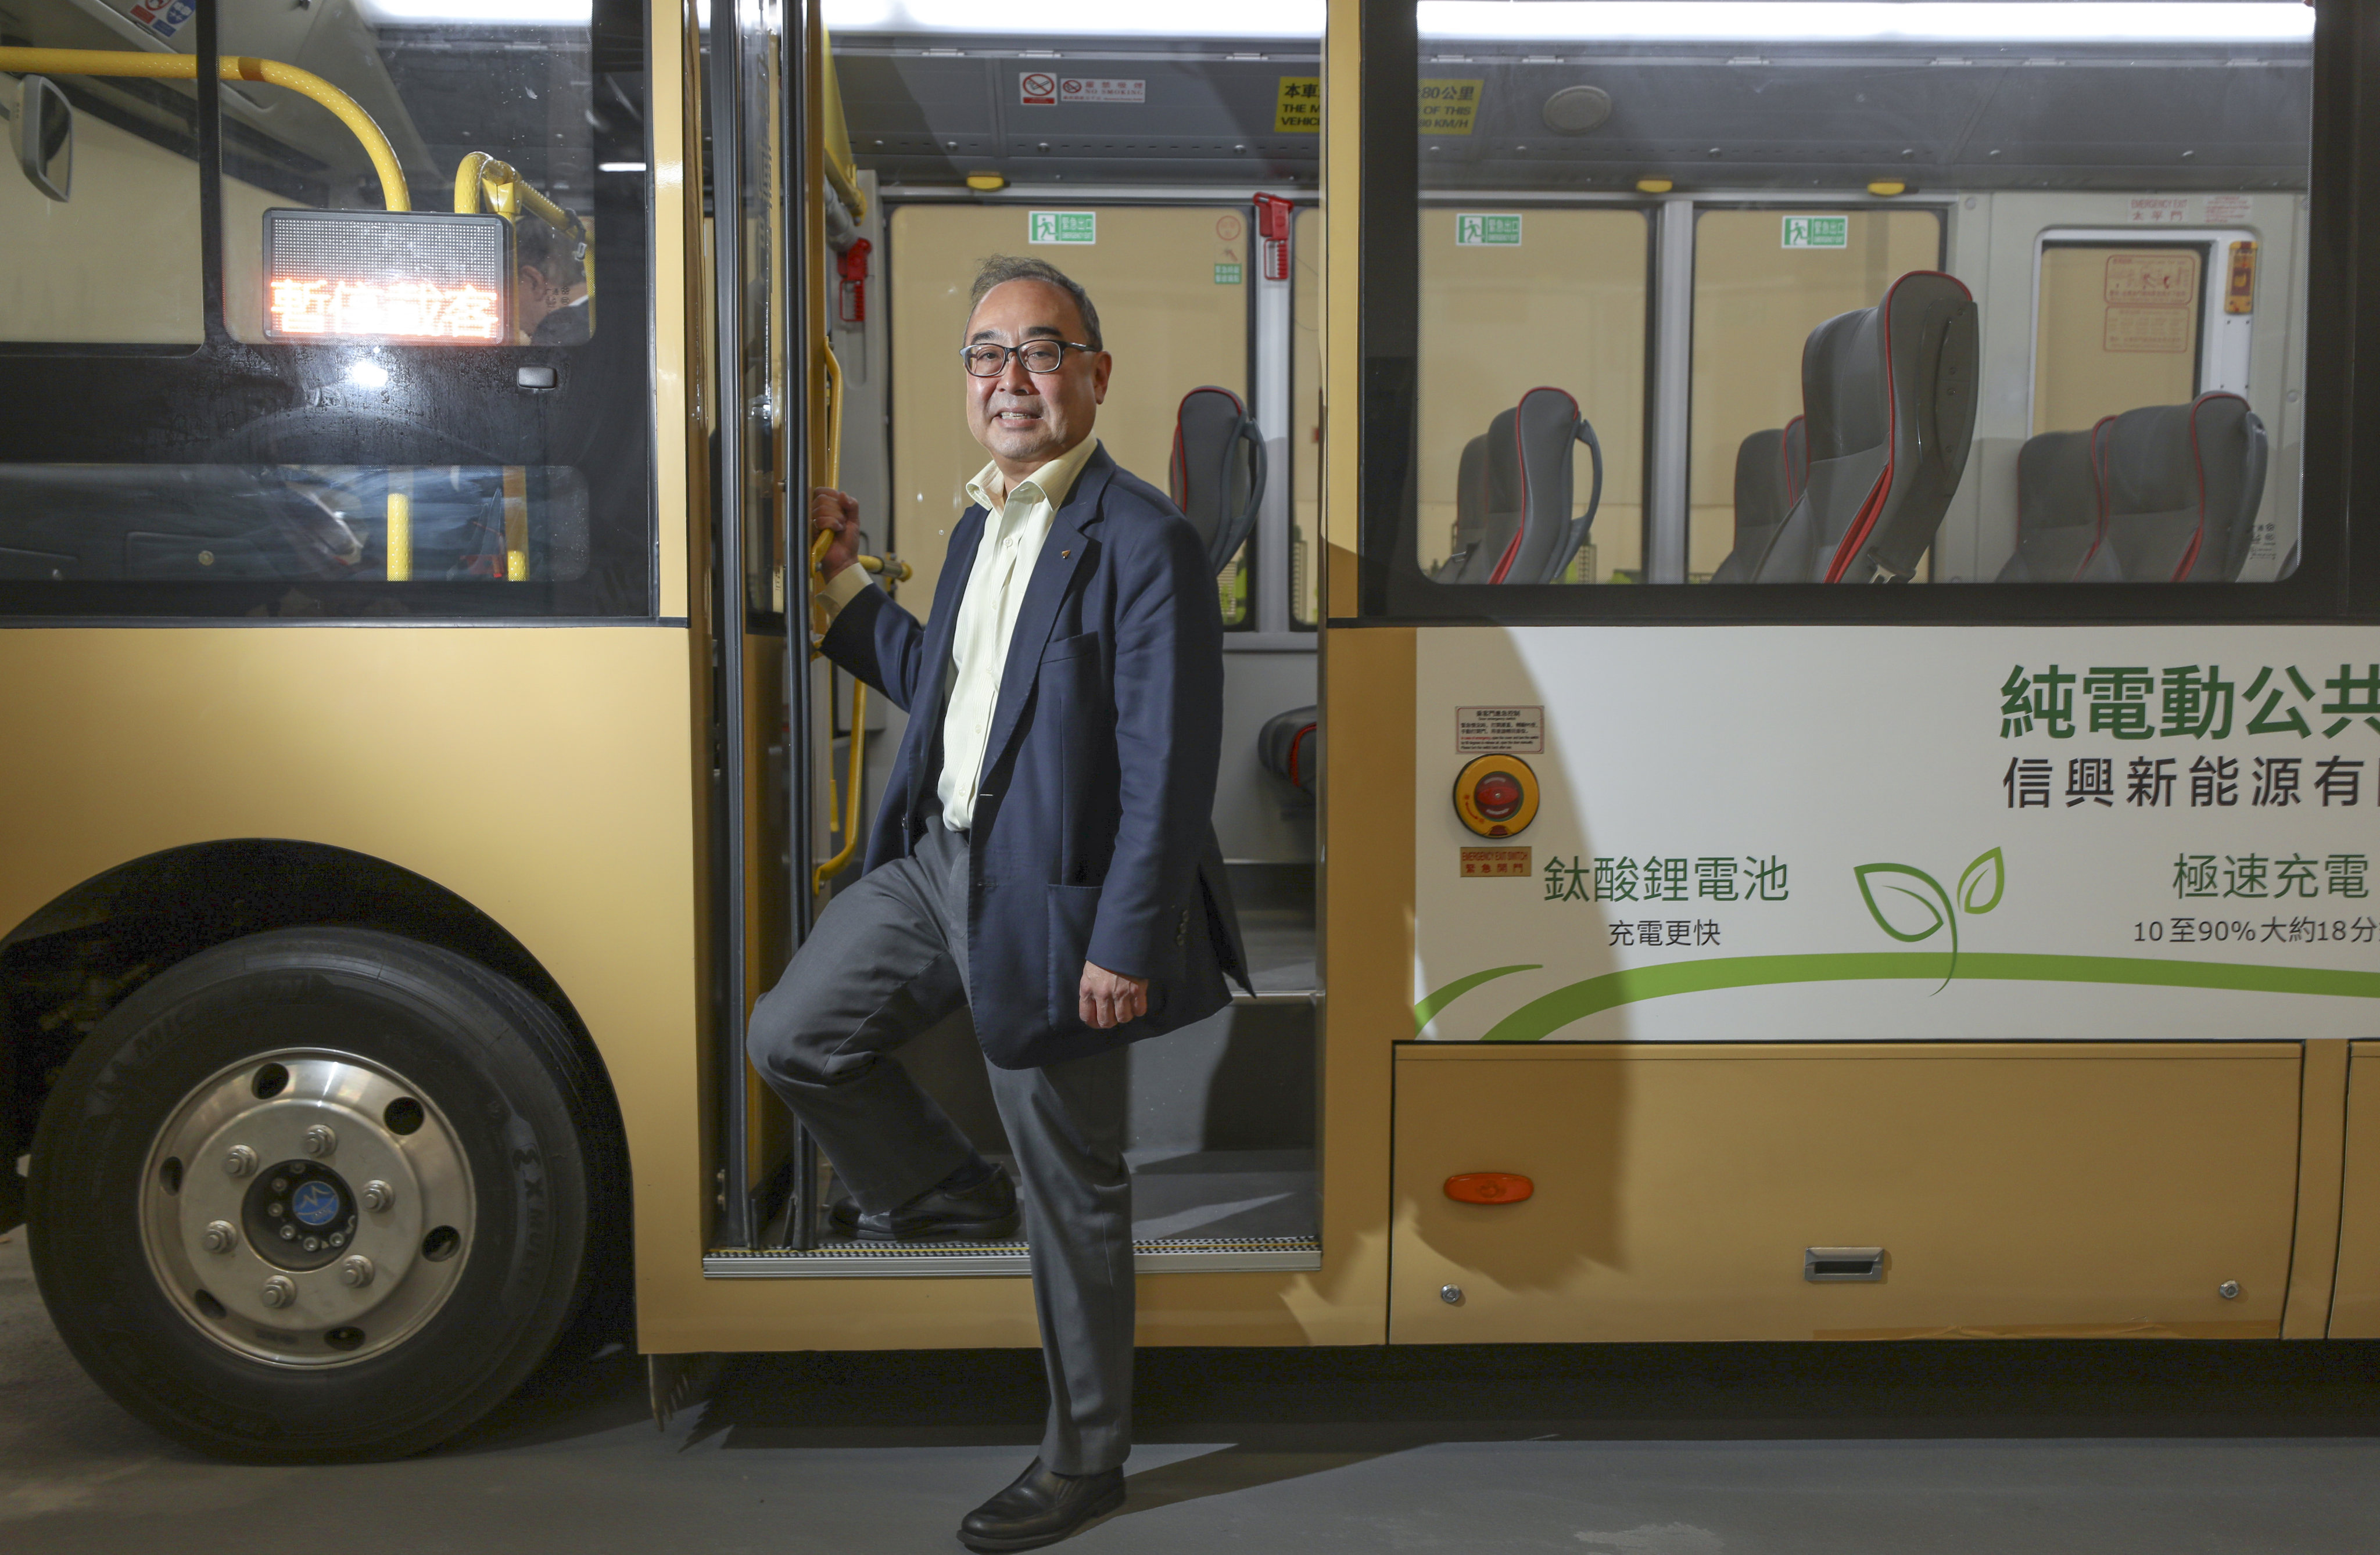 Shun Hing Group chairman and CEO David Mong hopes to break even in three years in the e-minibus market. Photo: Xiaomei Chen